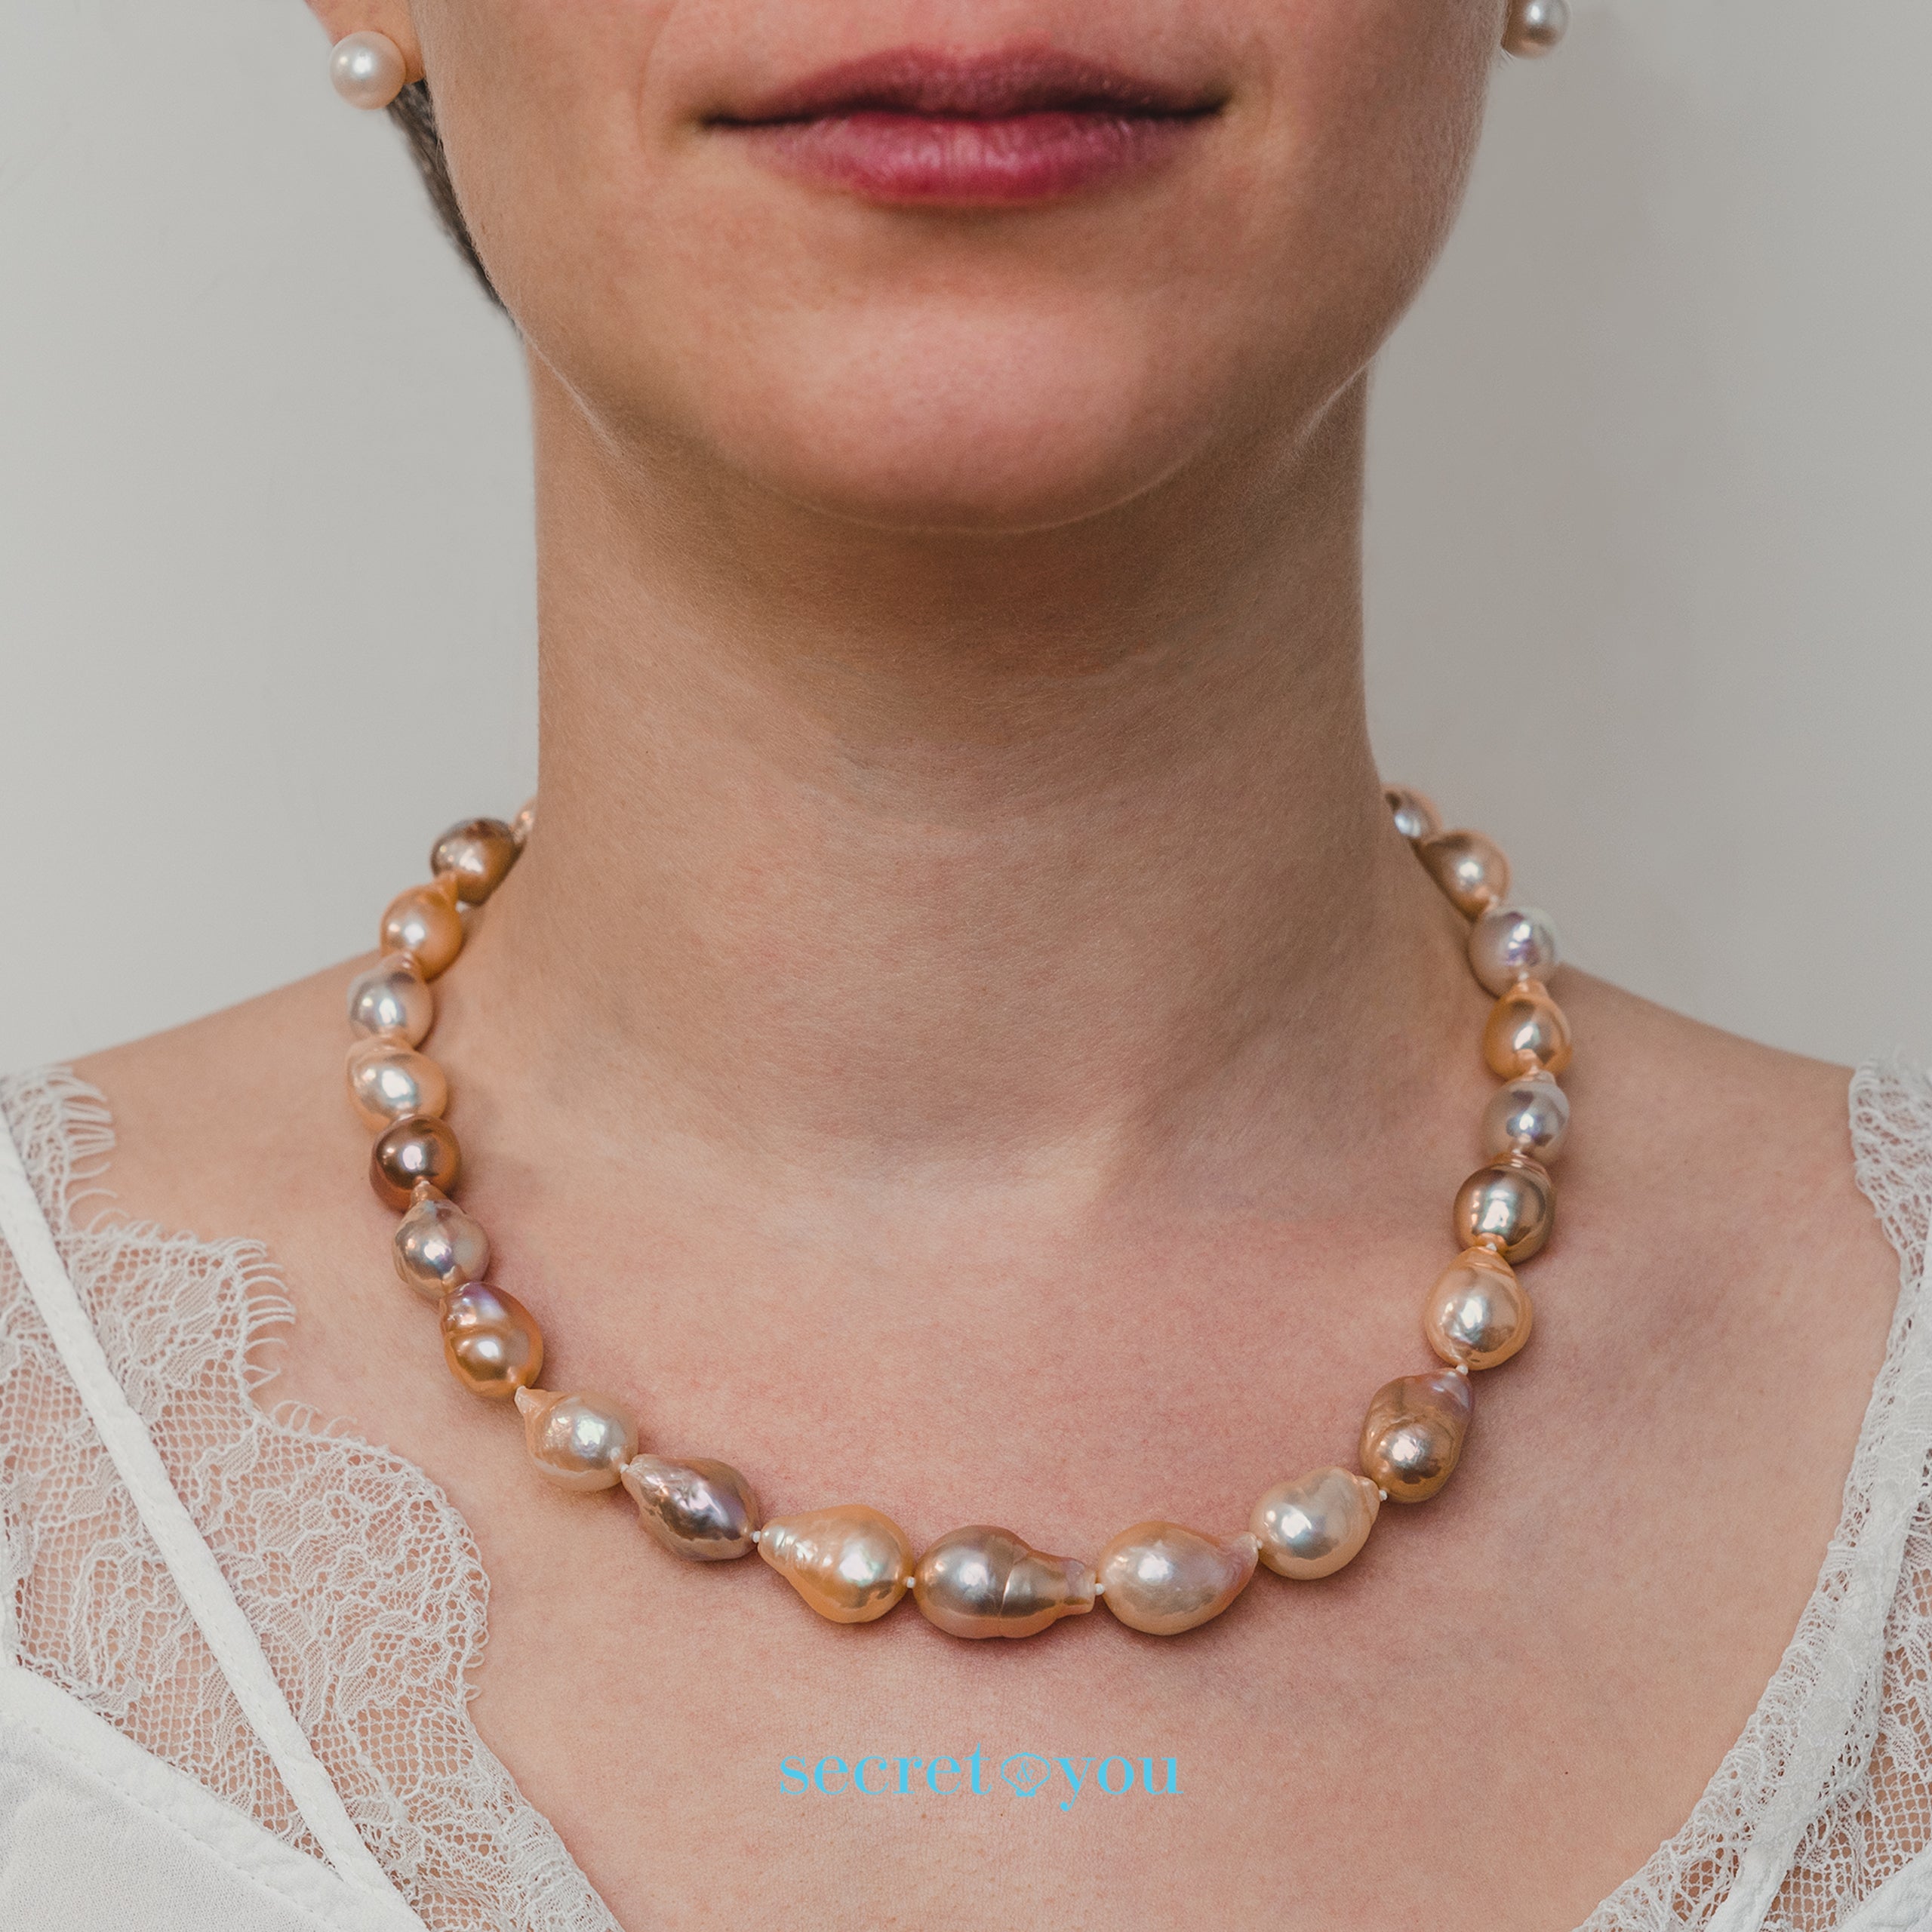 Natural Multicolor Baroque Freshwater Pearl Necklace, 11-13 mm and 45 cm long